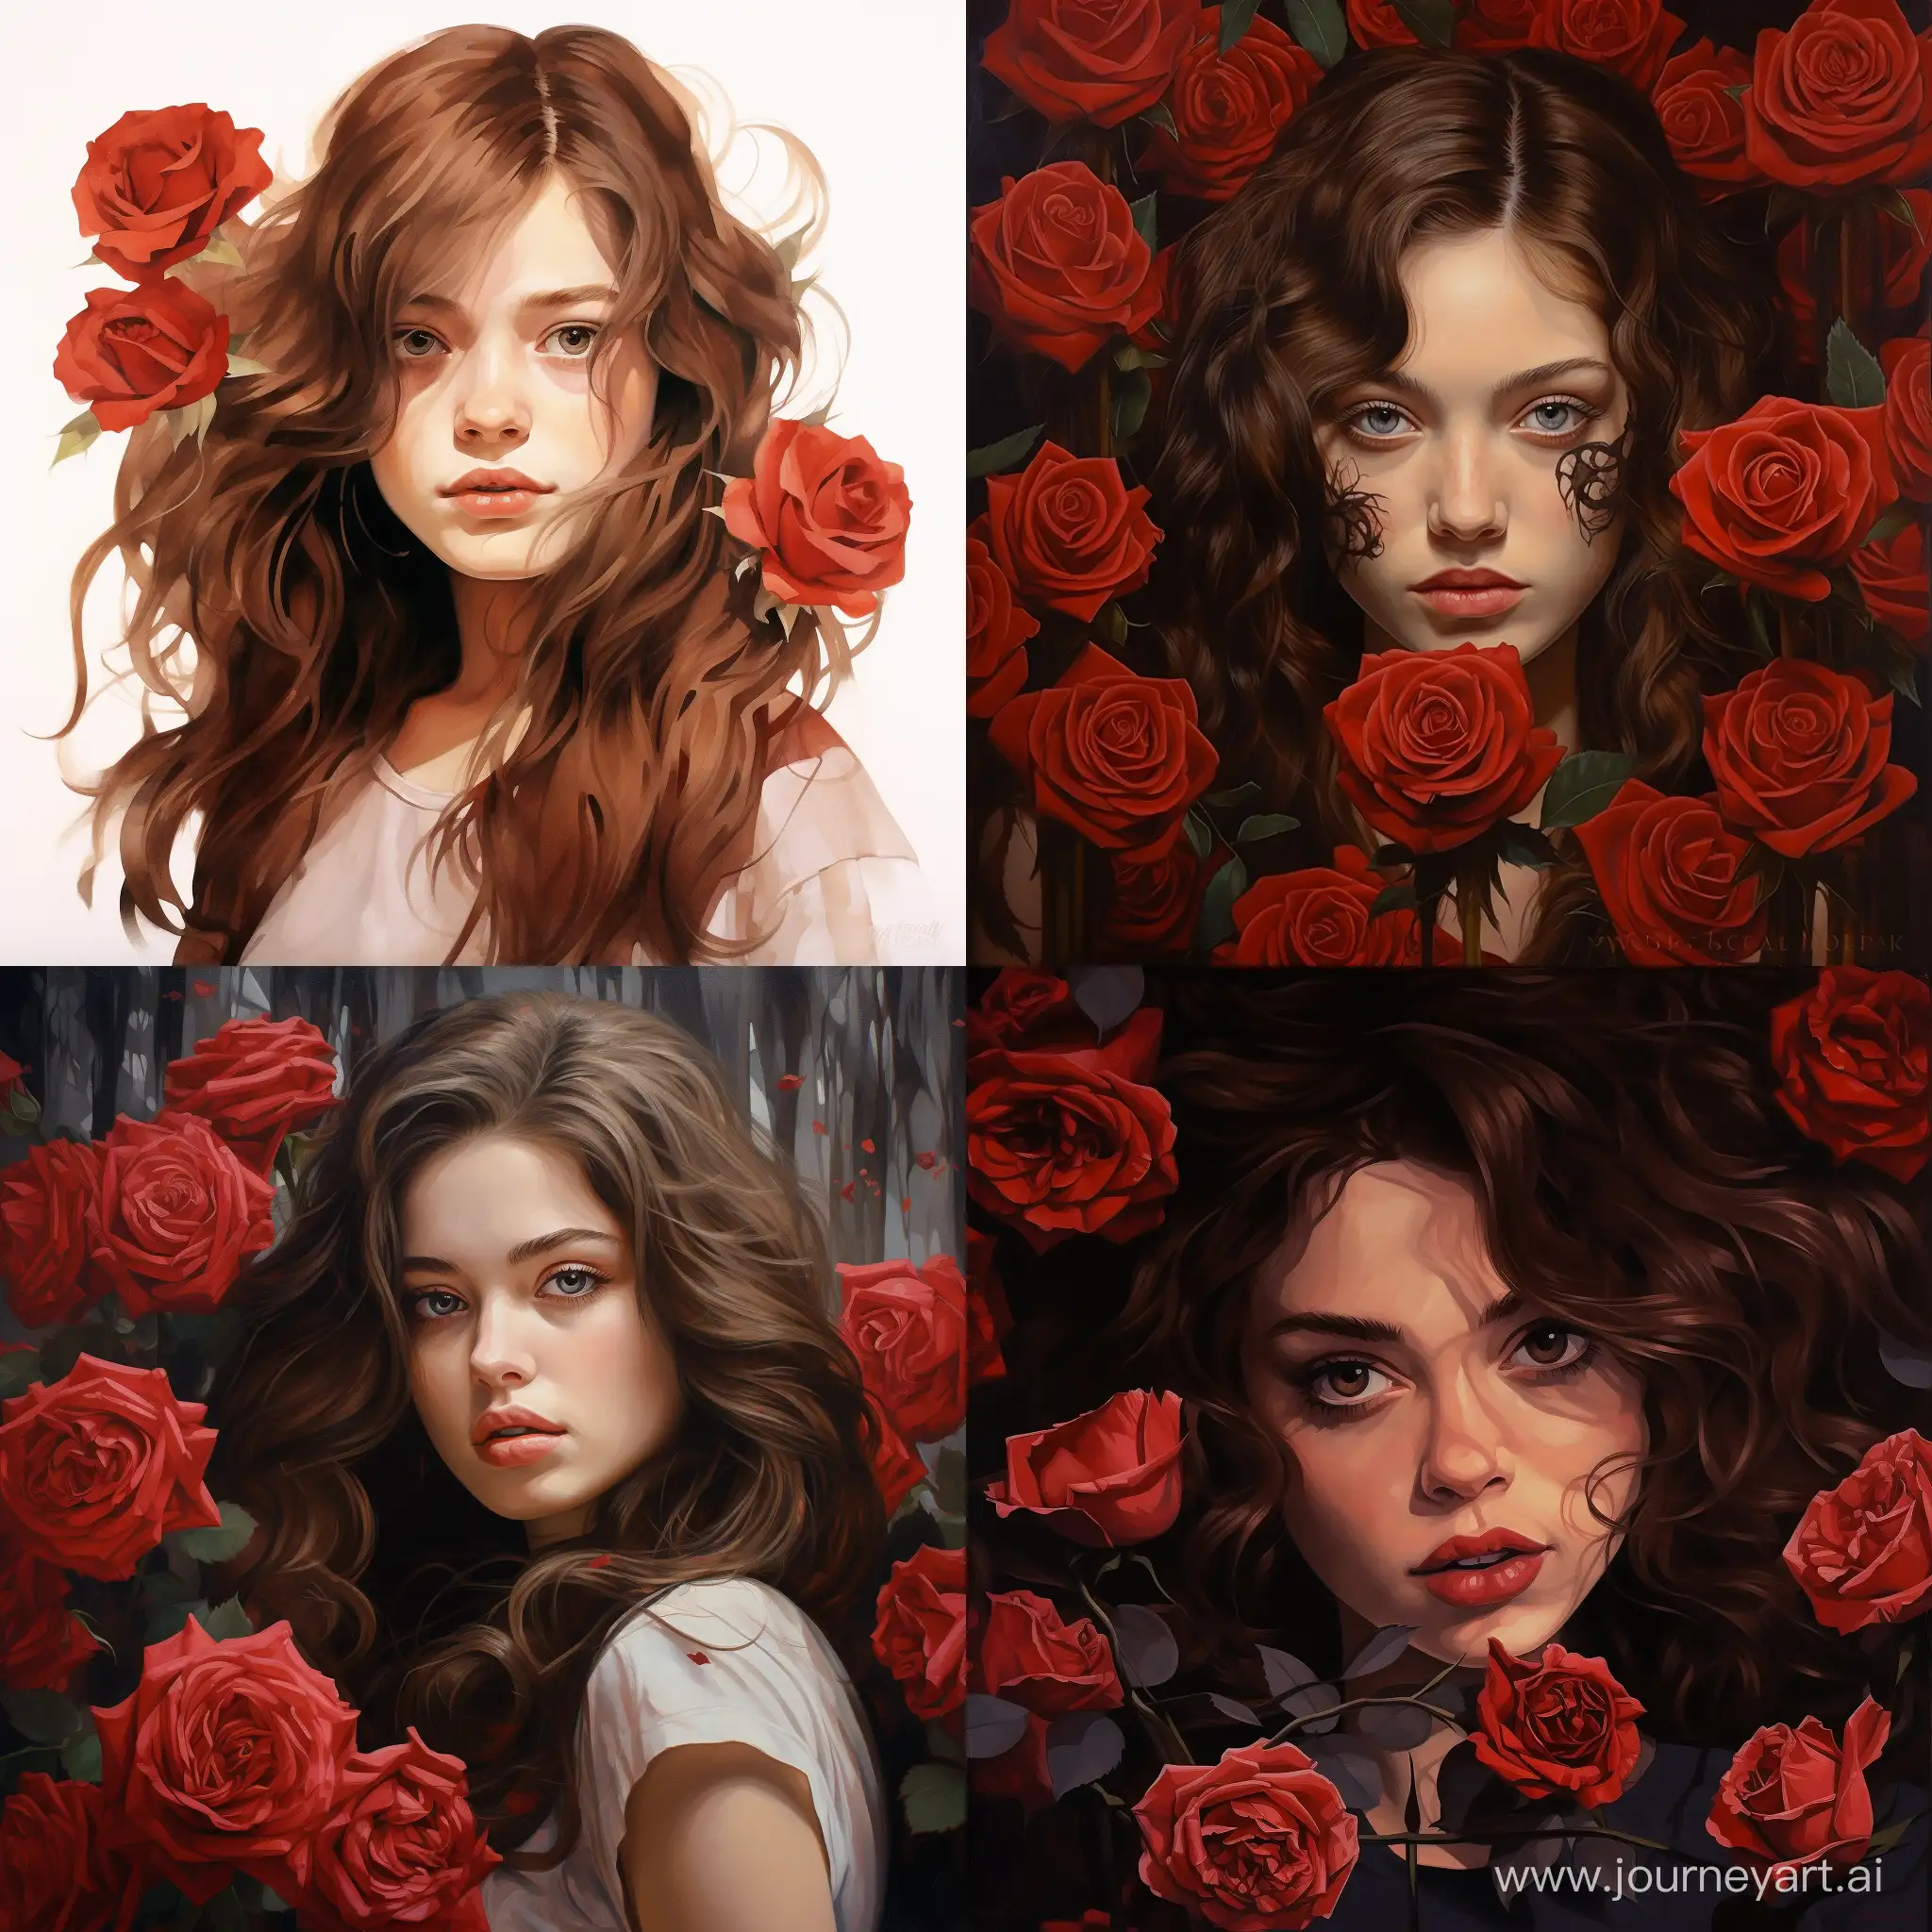 Adorable-Girl-with-Brown-Hair-and-Red-Roses-on-Her-Face